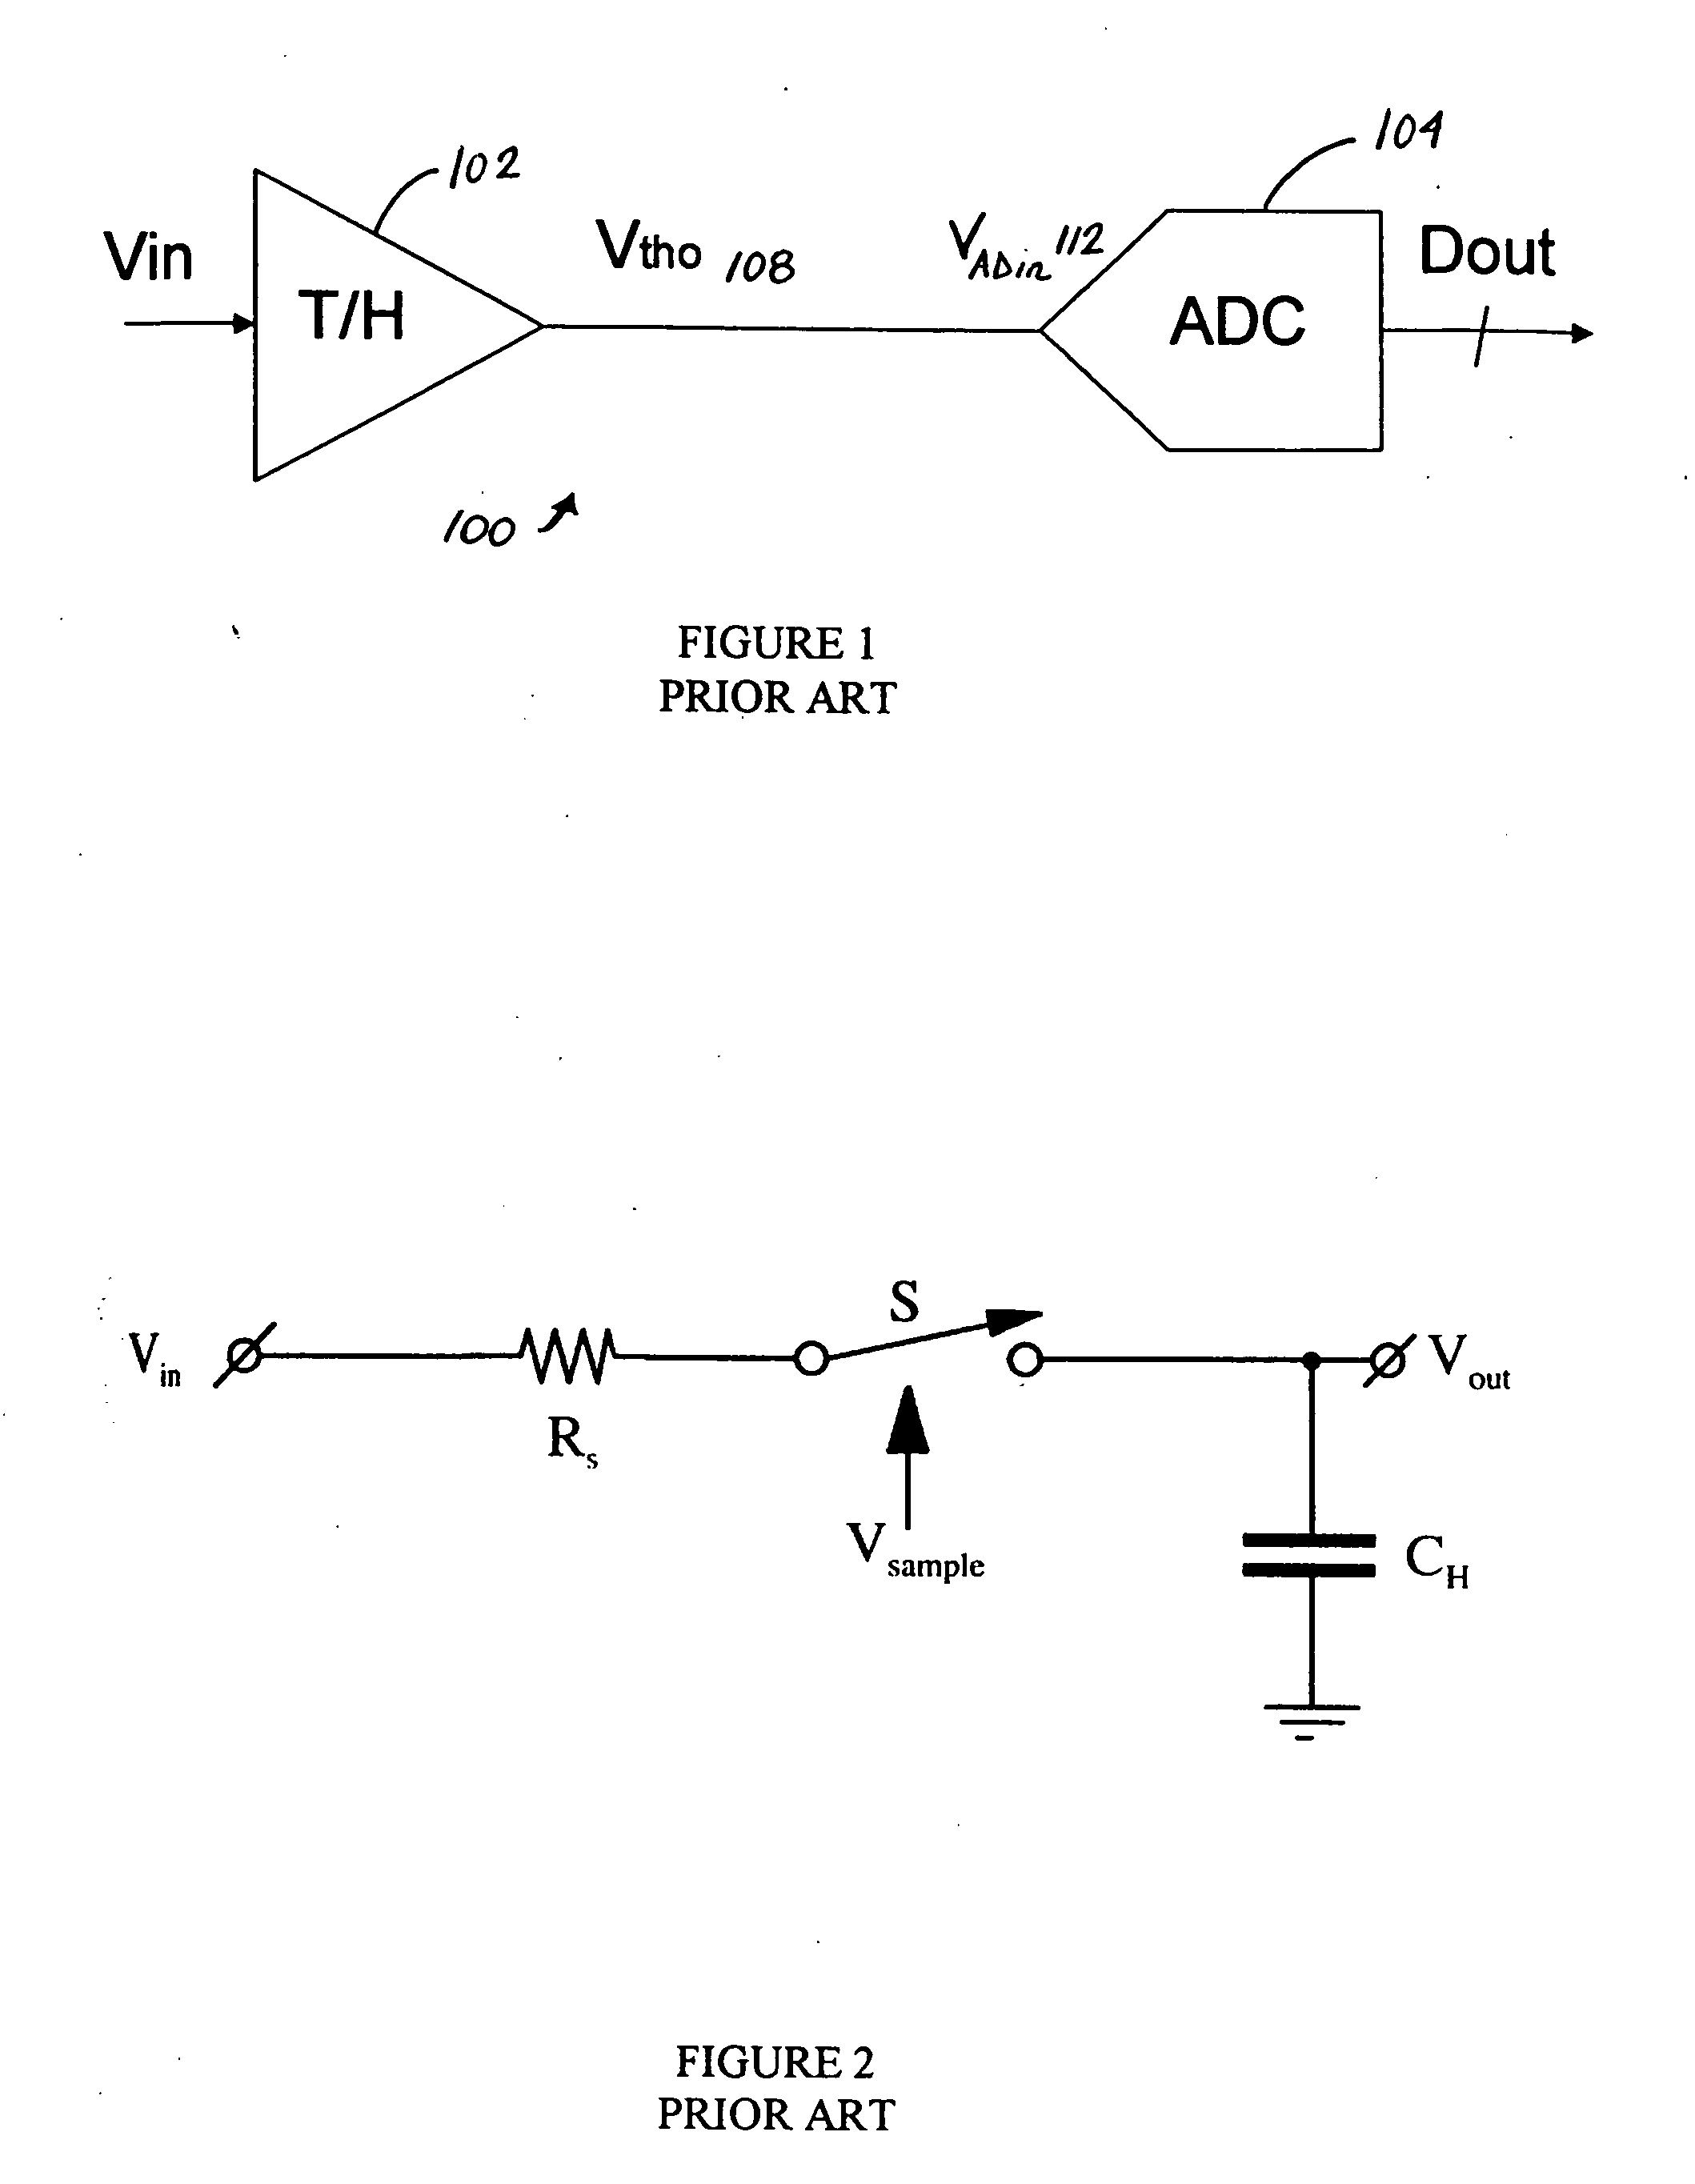 Disconnecting a time discrete circuit from a track-and-hold circuit in track mode